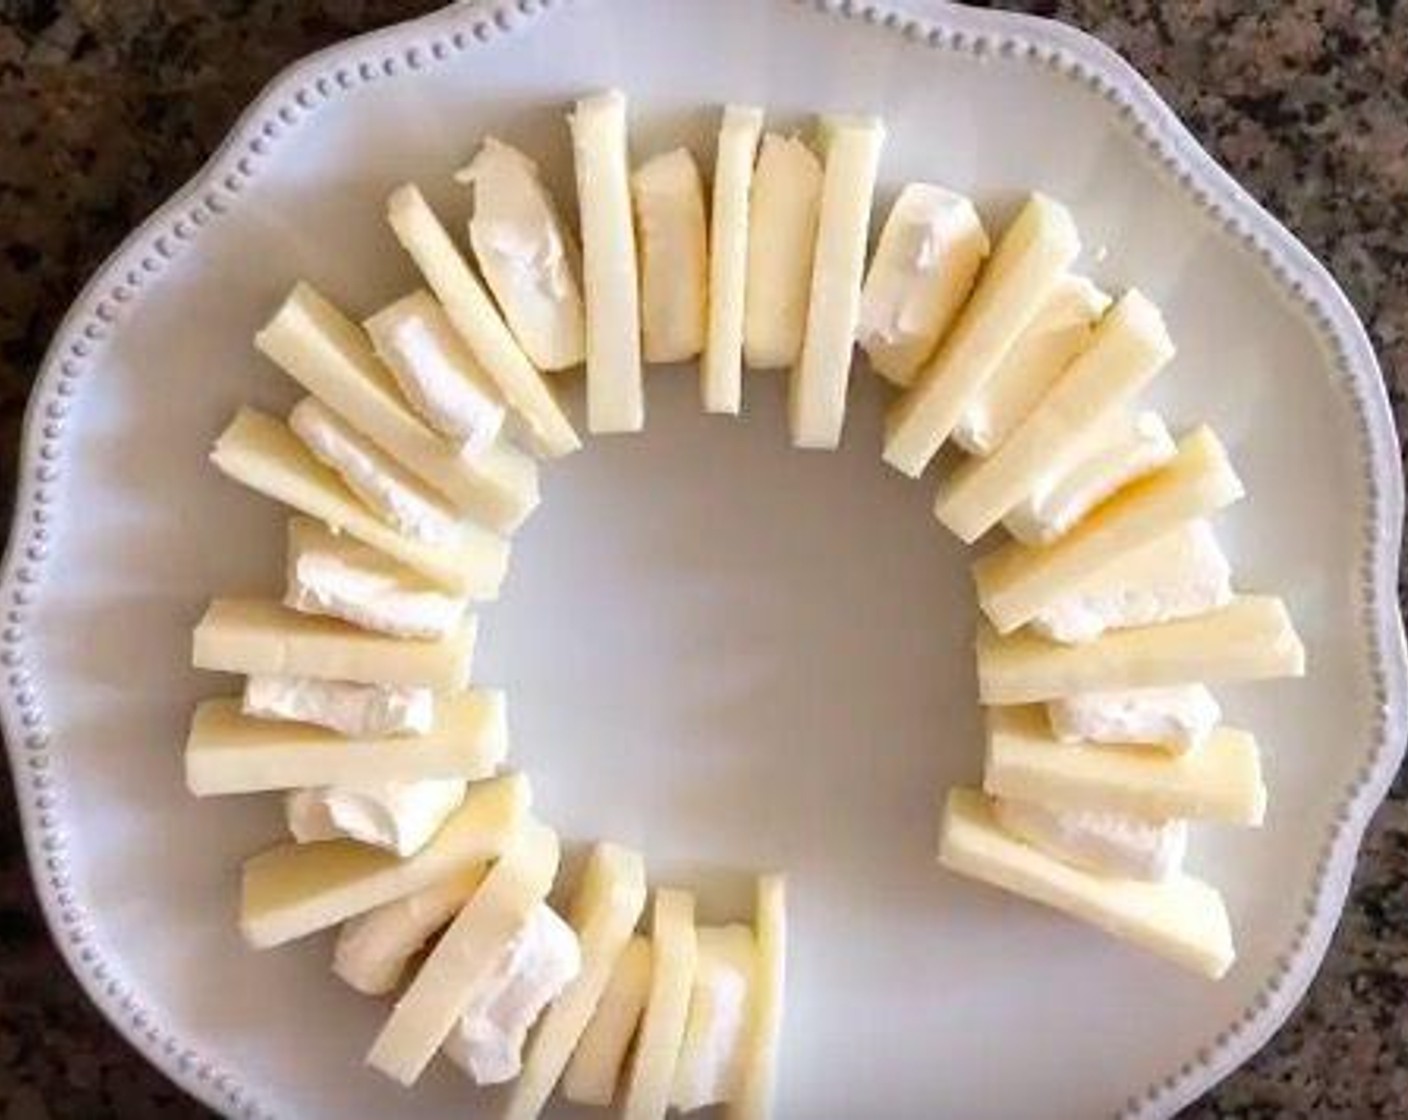 step 4 On a platter, arrange cheese slices upright in a ring with one slice of mozzarella, one slice of Monterey Jack, and one slice of cream cheese until you form a complete circle.